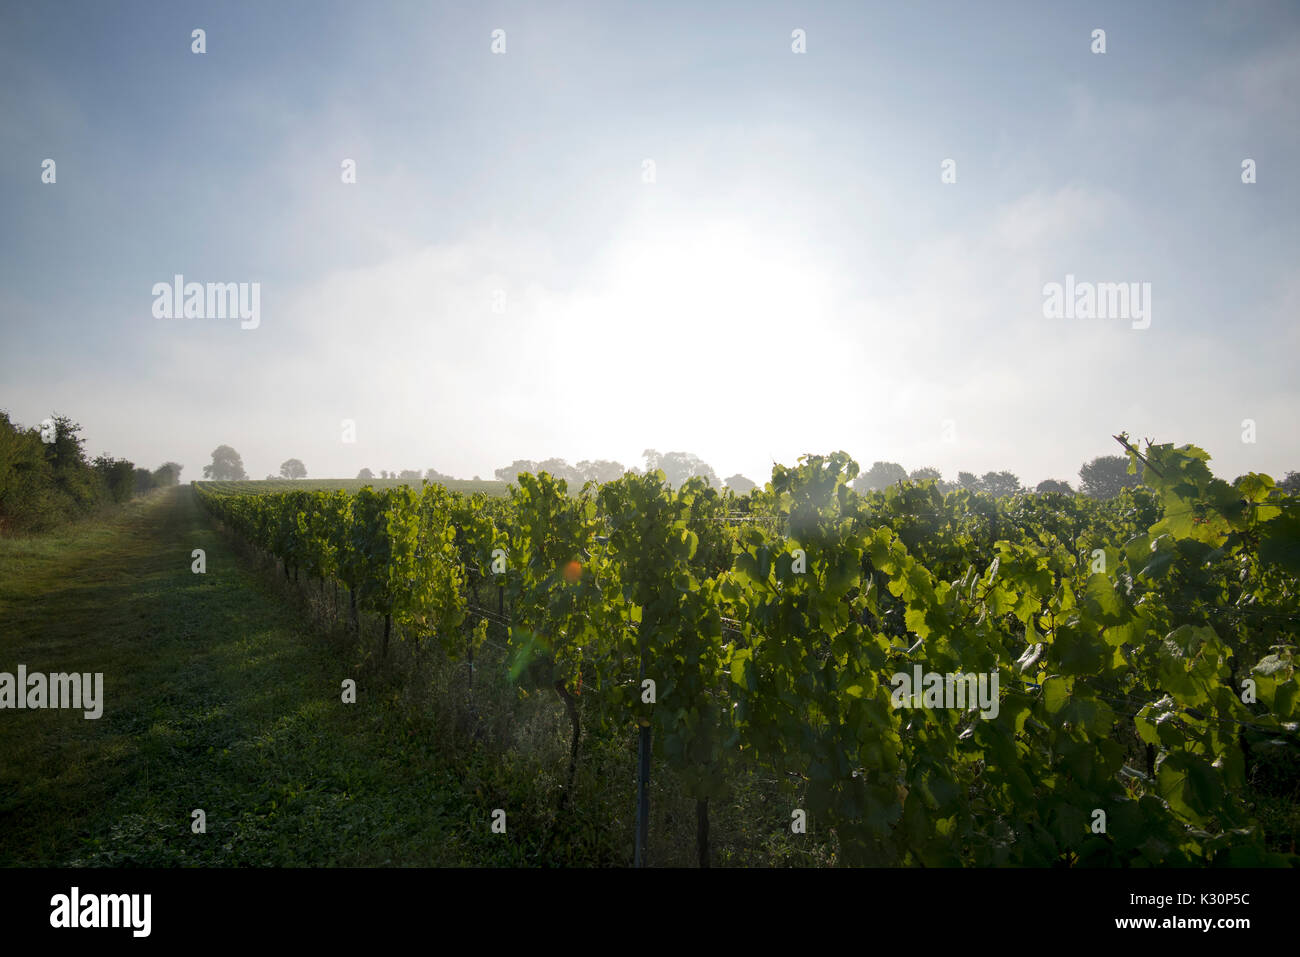 English vine yard, rows of grape vines in early morning mist and low sun, late August as the grapes ripen. Kent, UK Stock Photo